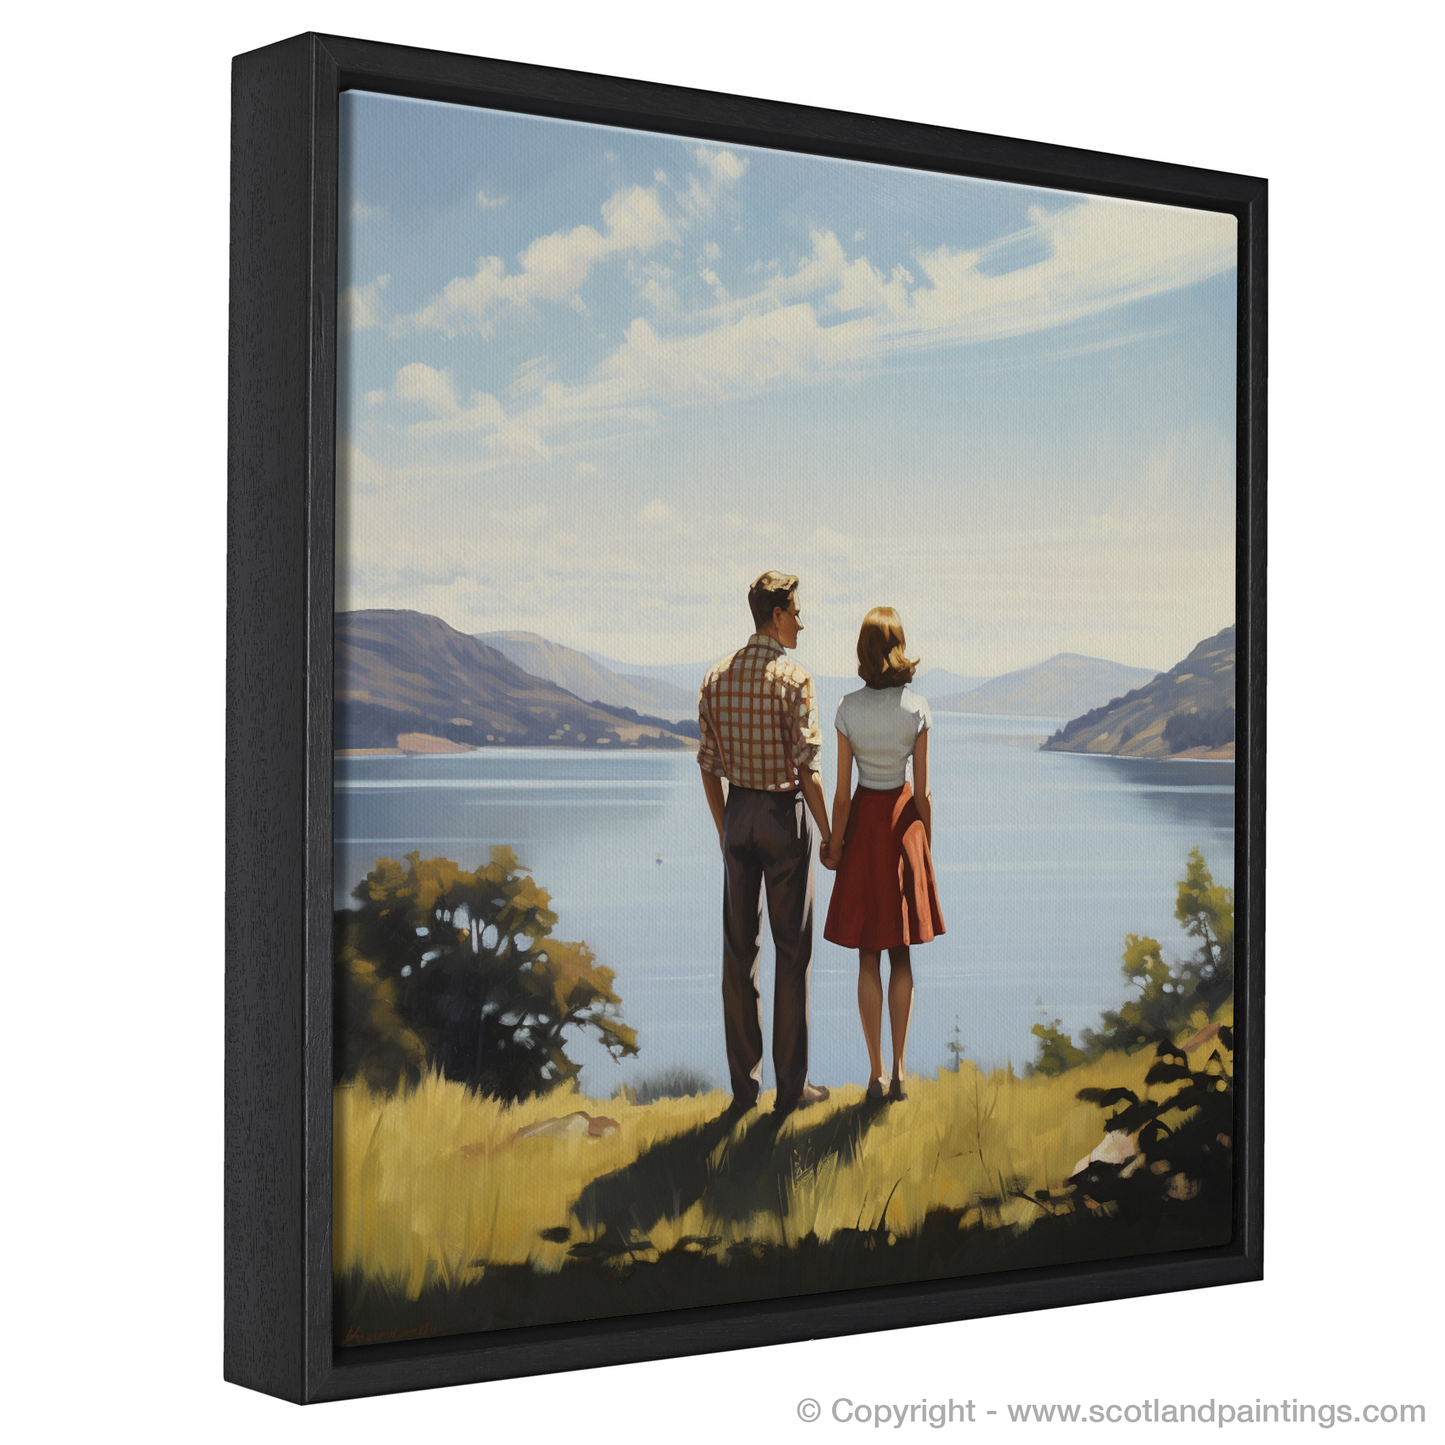 Painting and Art Print of A couple holding hands looking out on Loch Lomond entitled "Hand in Hand by Loch Lomond".